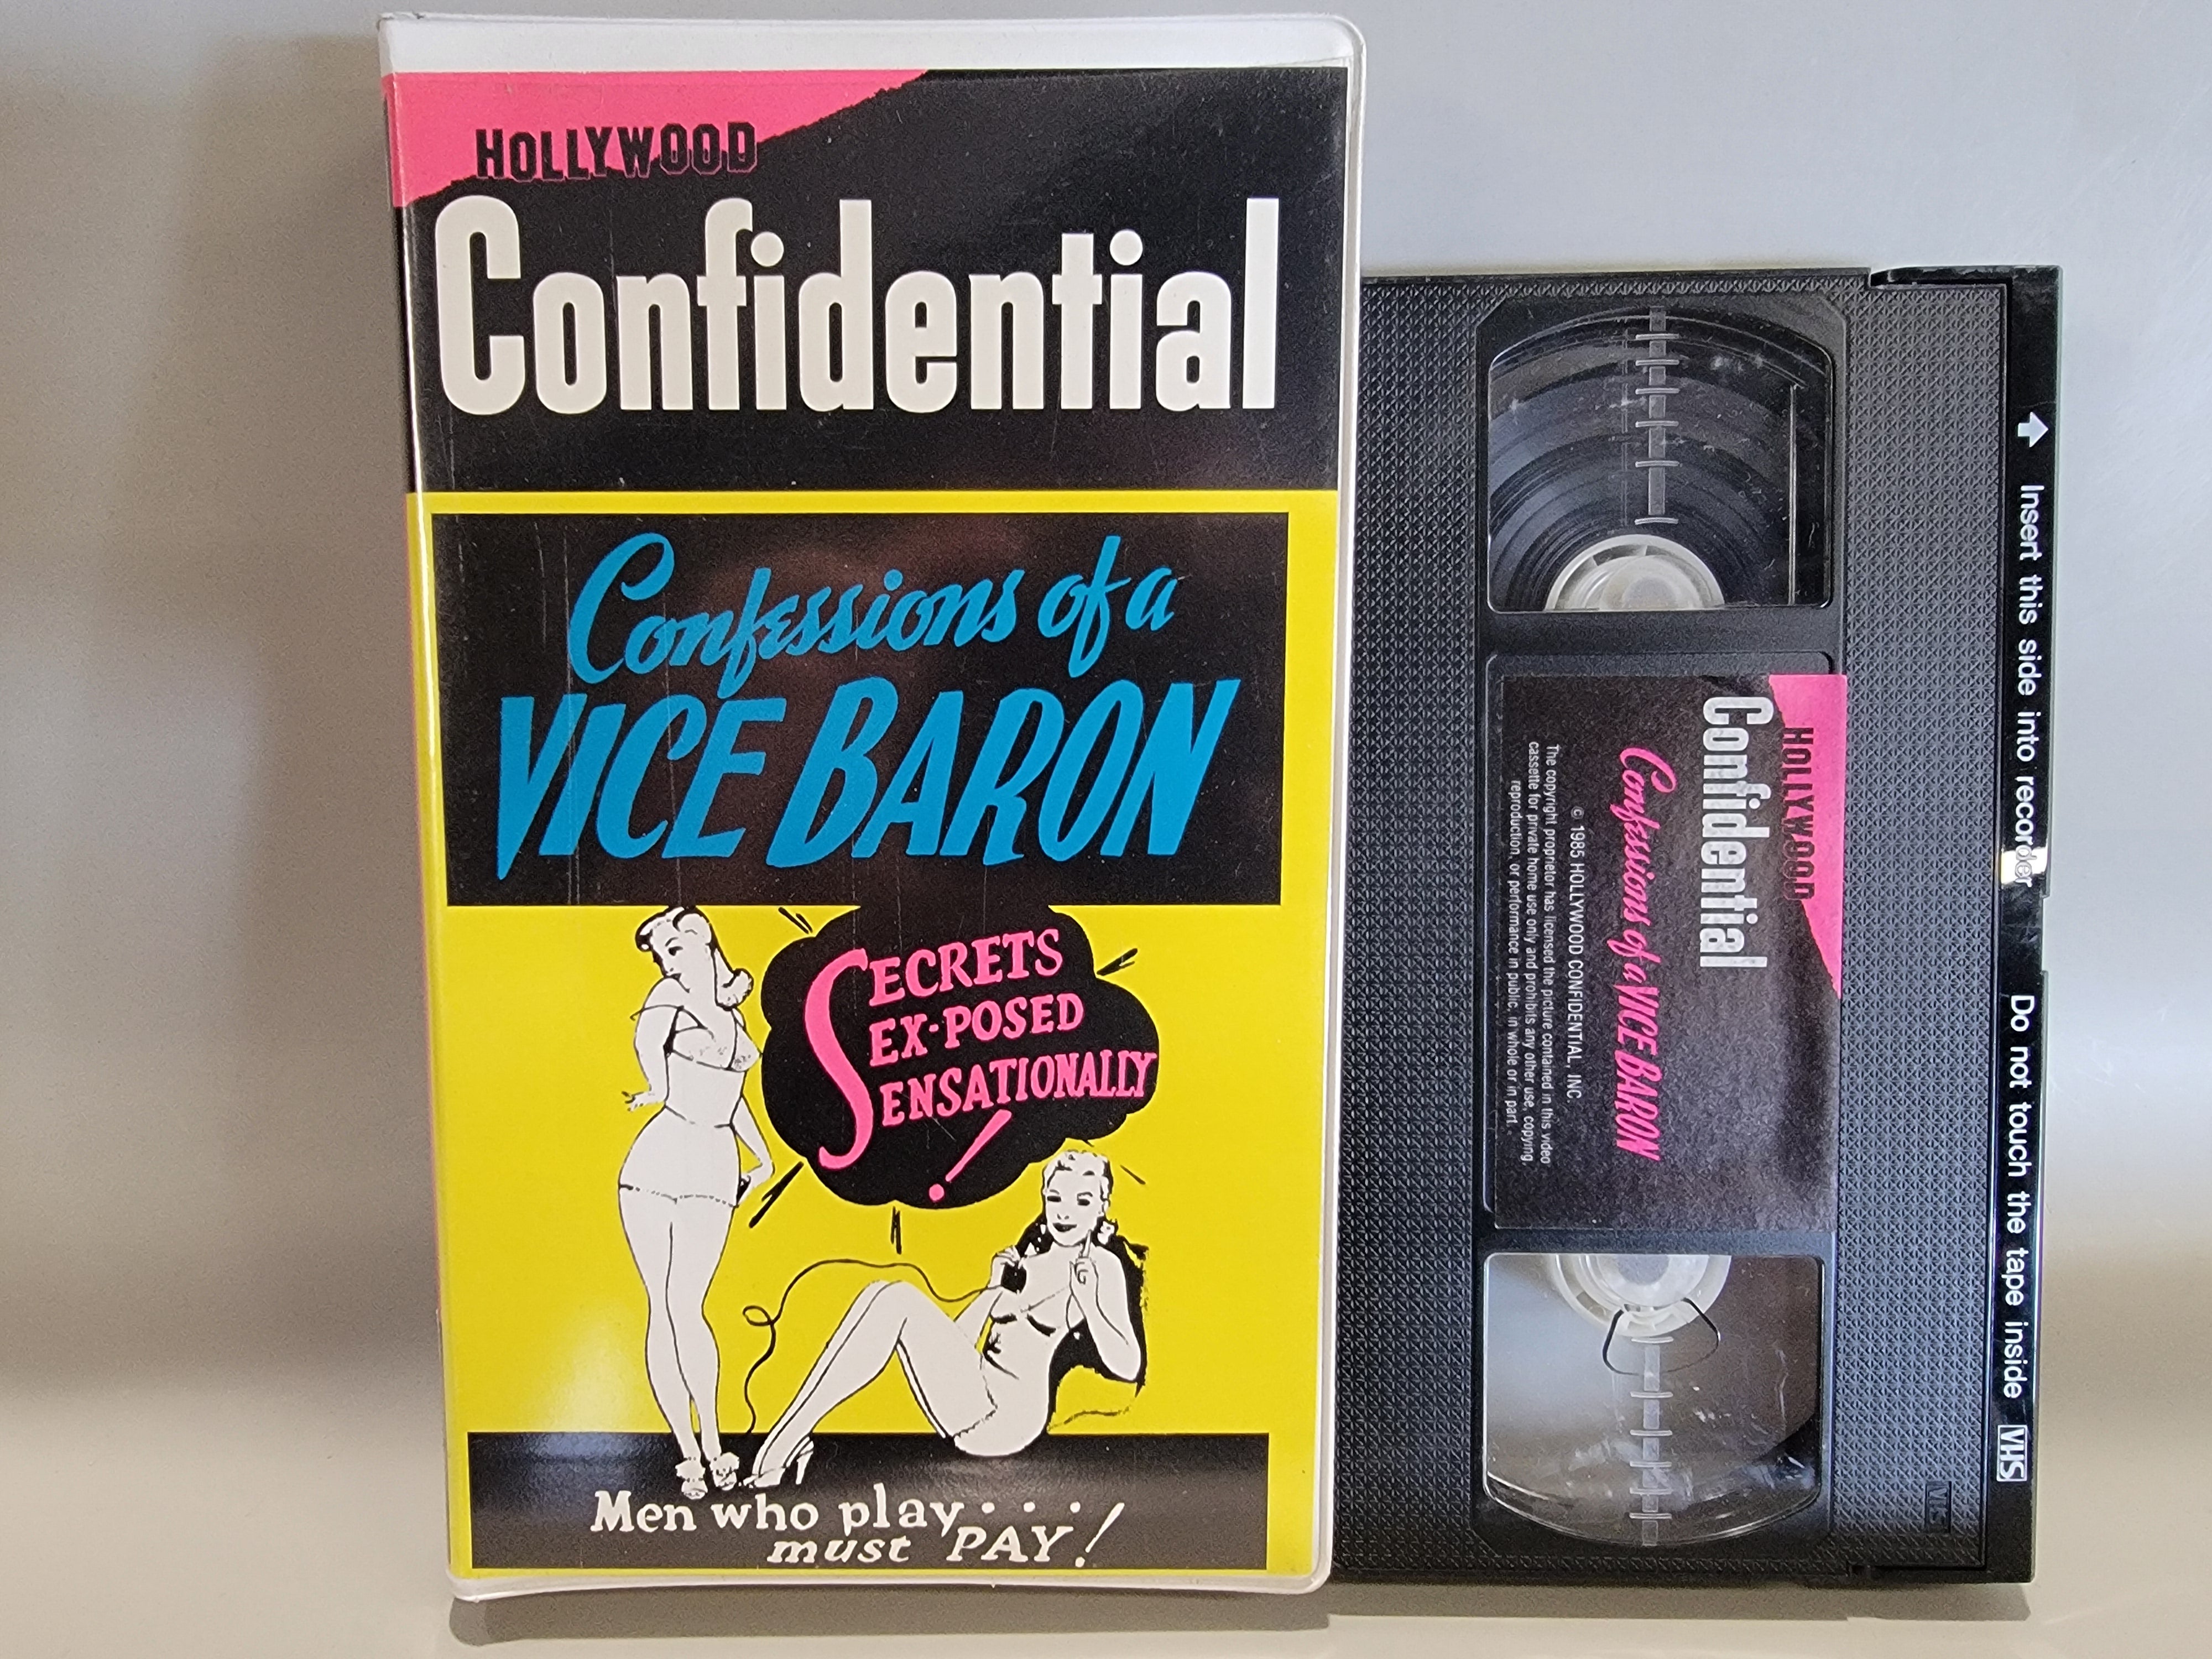 CONFESSIONS OF A VICE BARON VHS [USED]